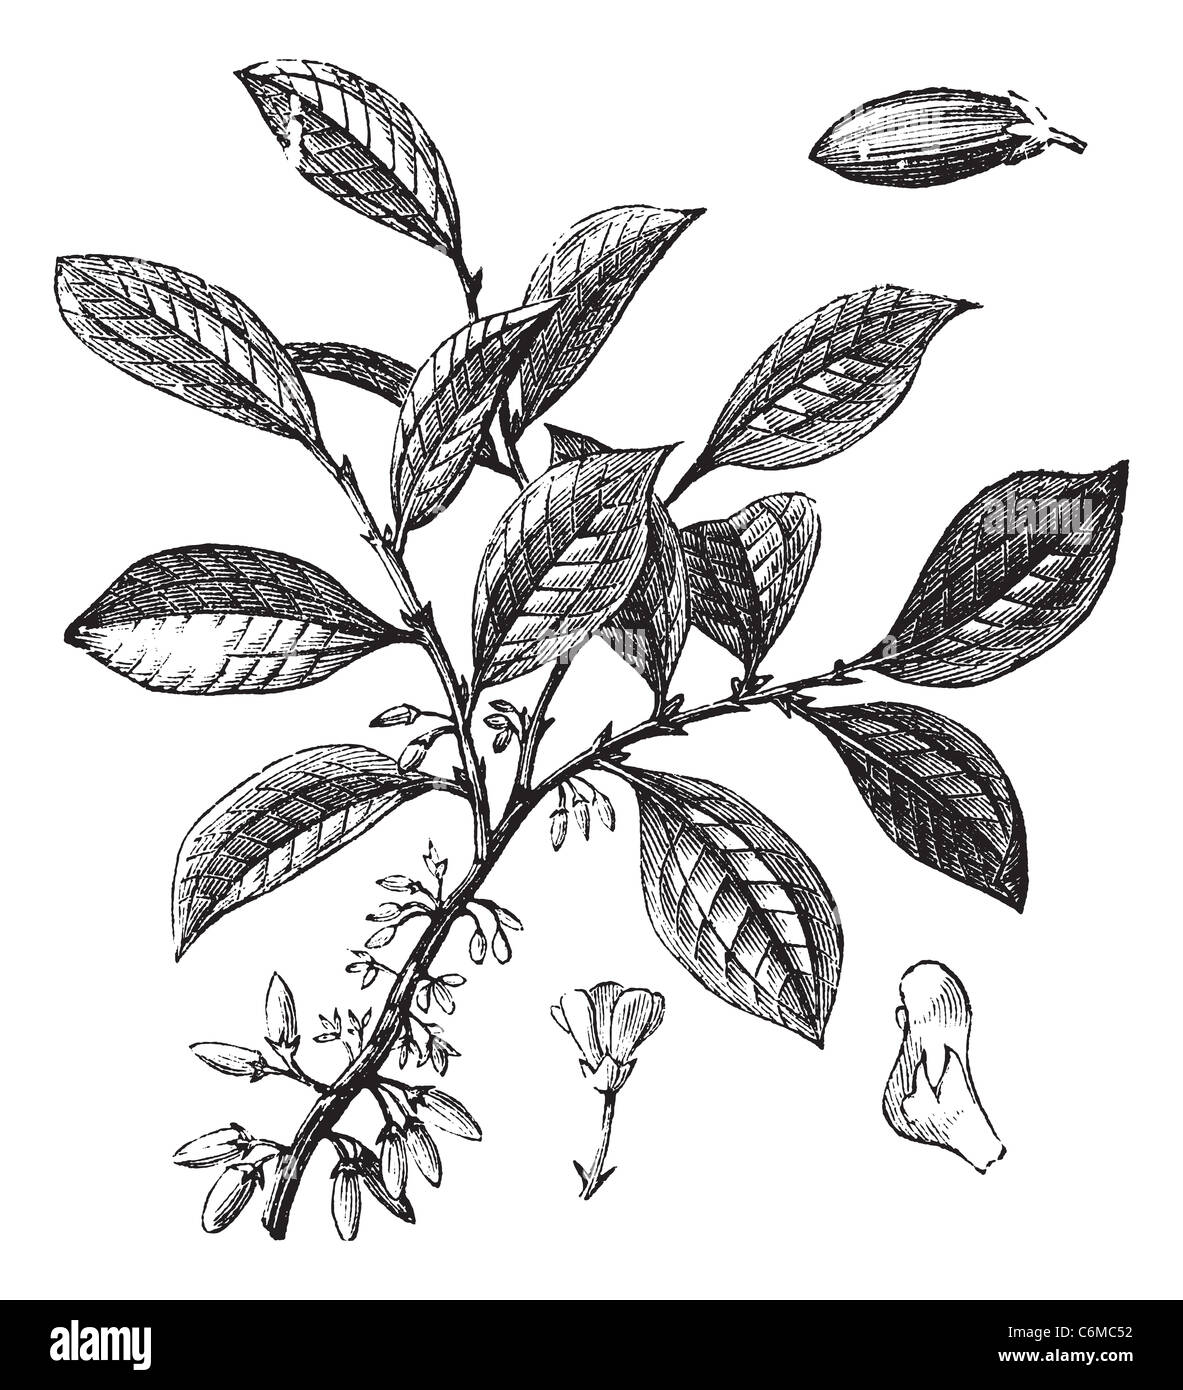 Cocaine or Coca or Erythroxylum coca, vintage engraving. Old engraved illustration of a Cocaine plant showing flowers. Stock Photo